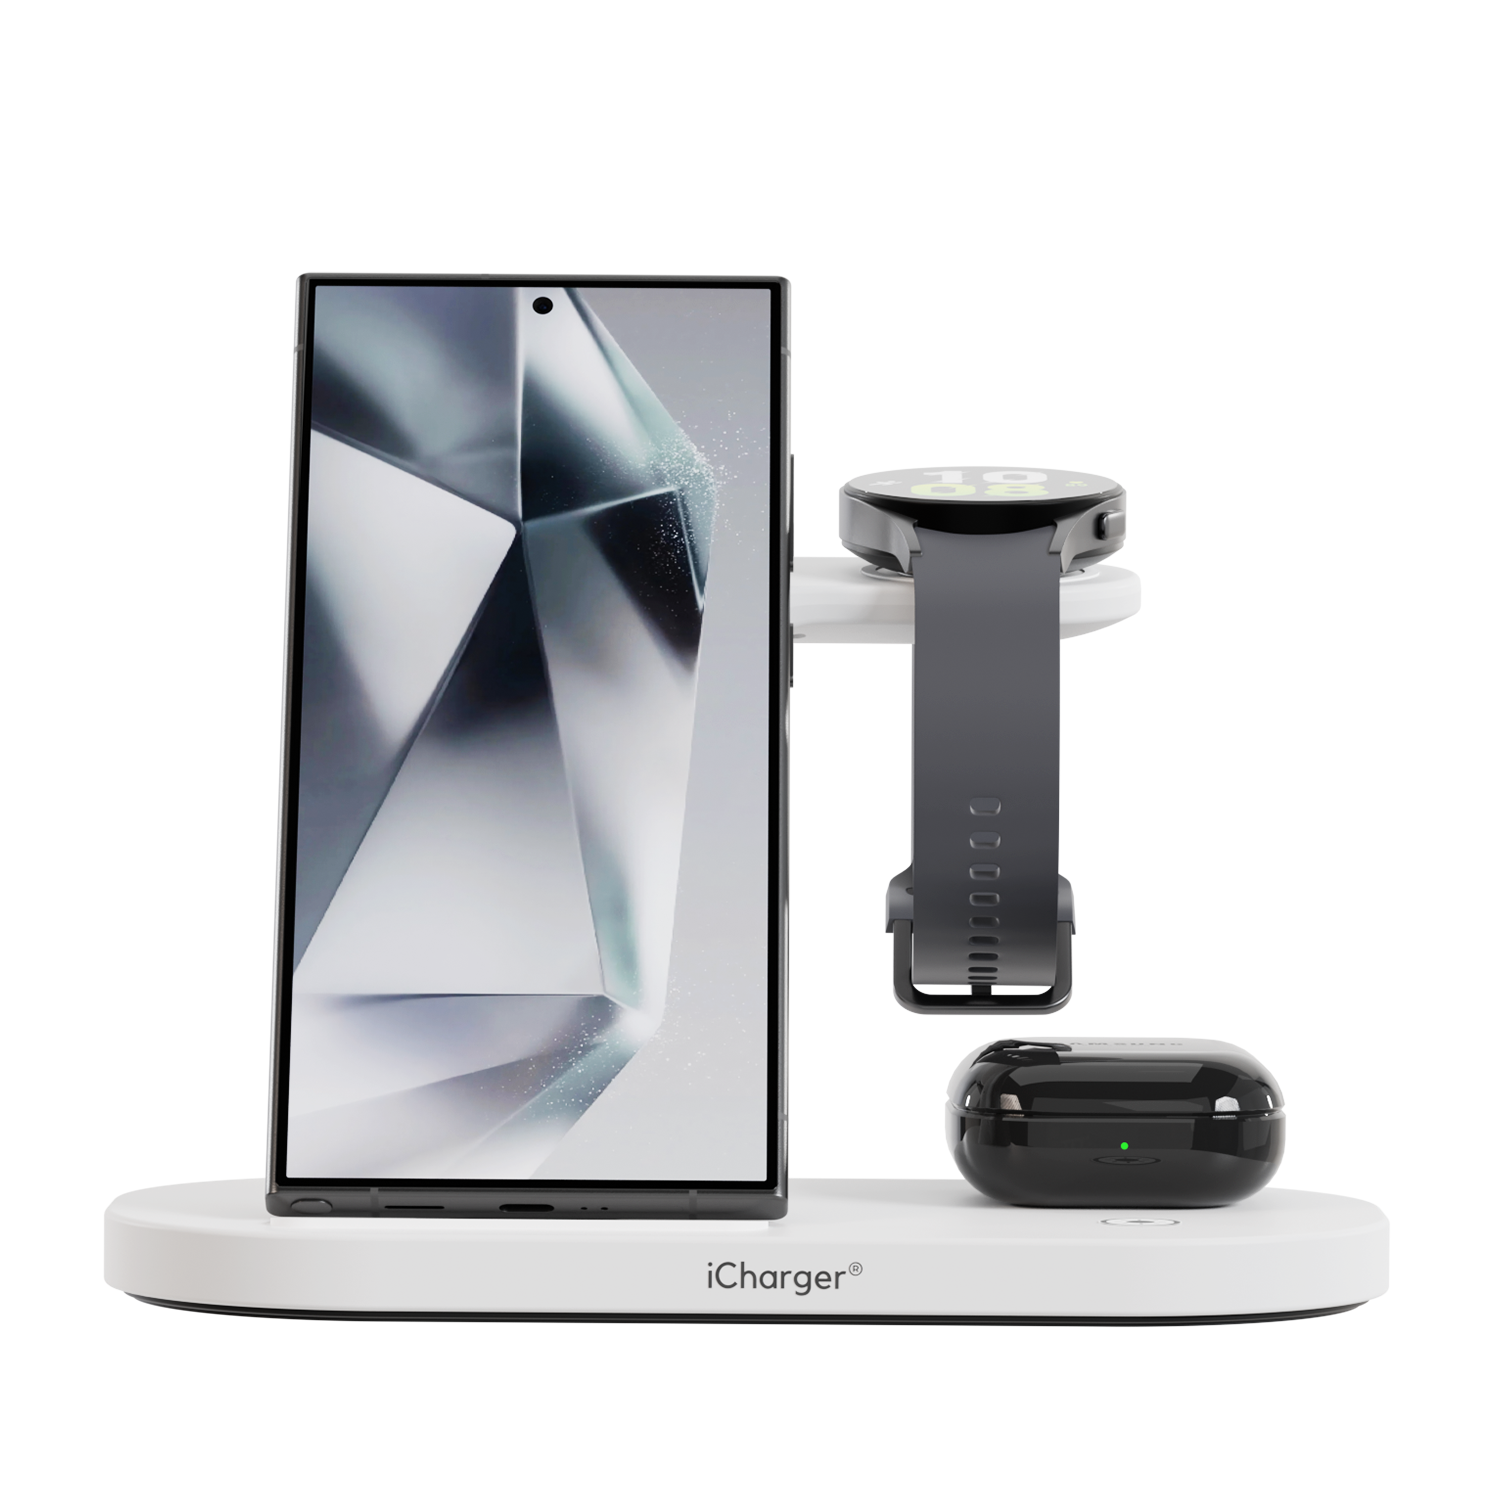 White iCharger Pro Edition 3-in-1 Wireless Charging Station for Samsung devices with fast-charging capability, displaying real-time battery status and weather on Galaxy Watch.